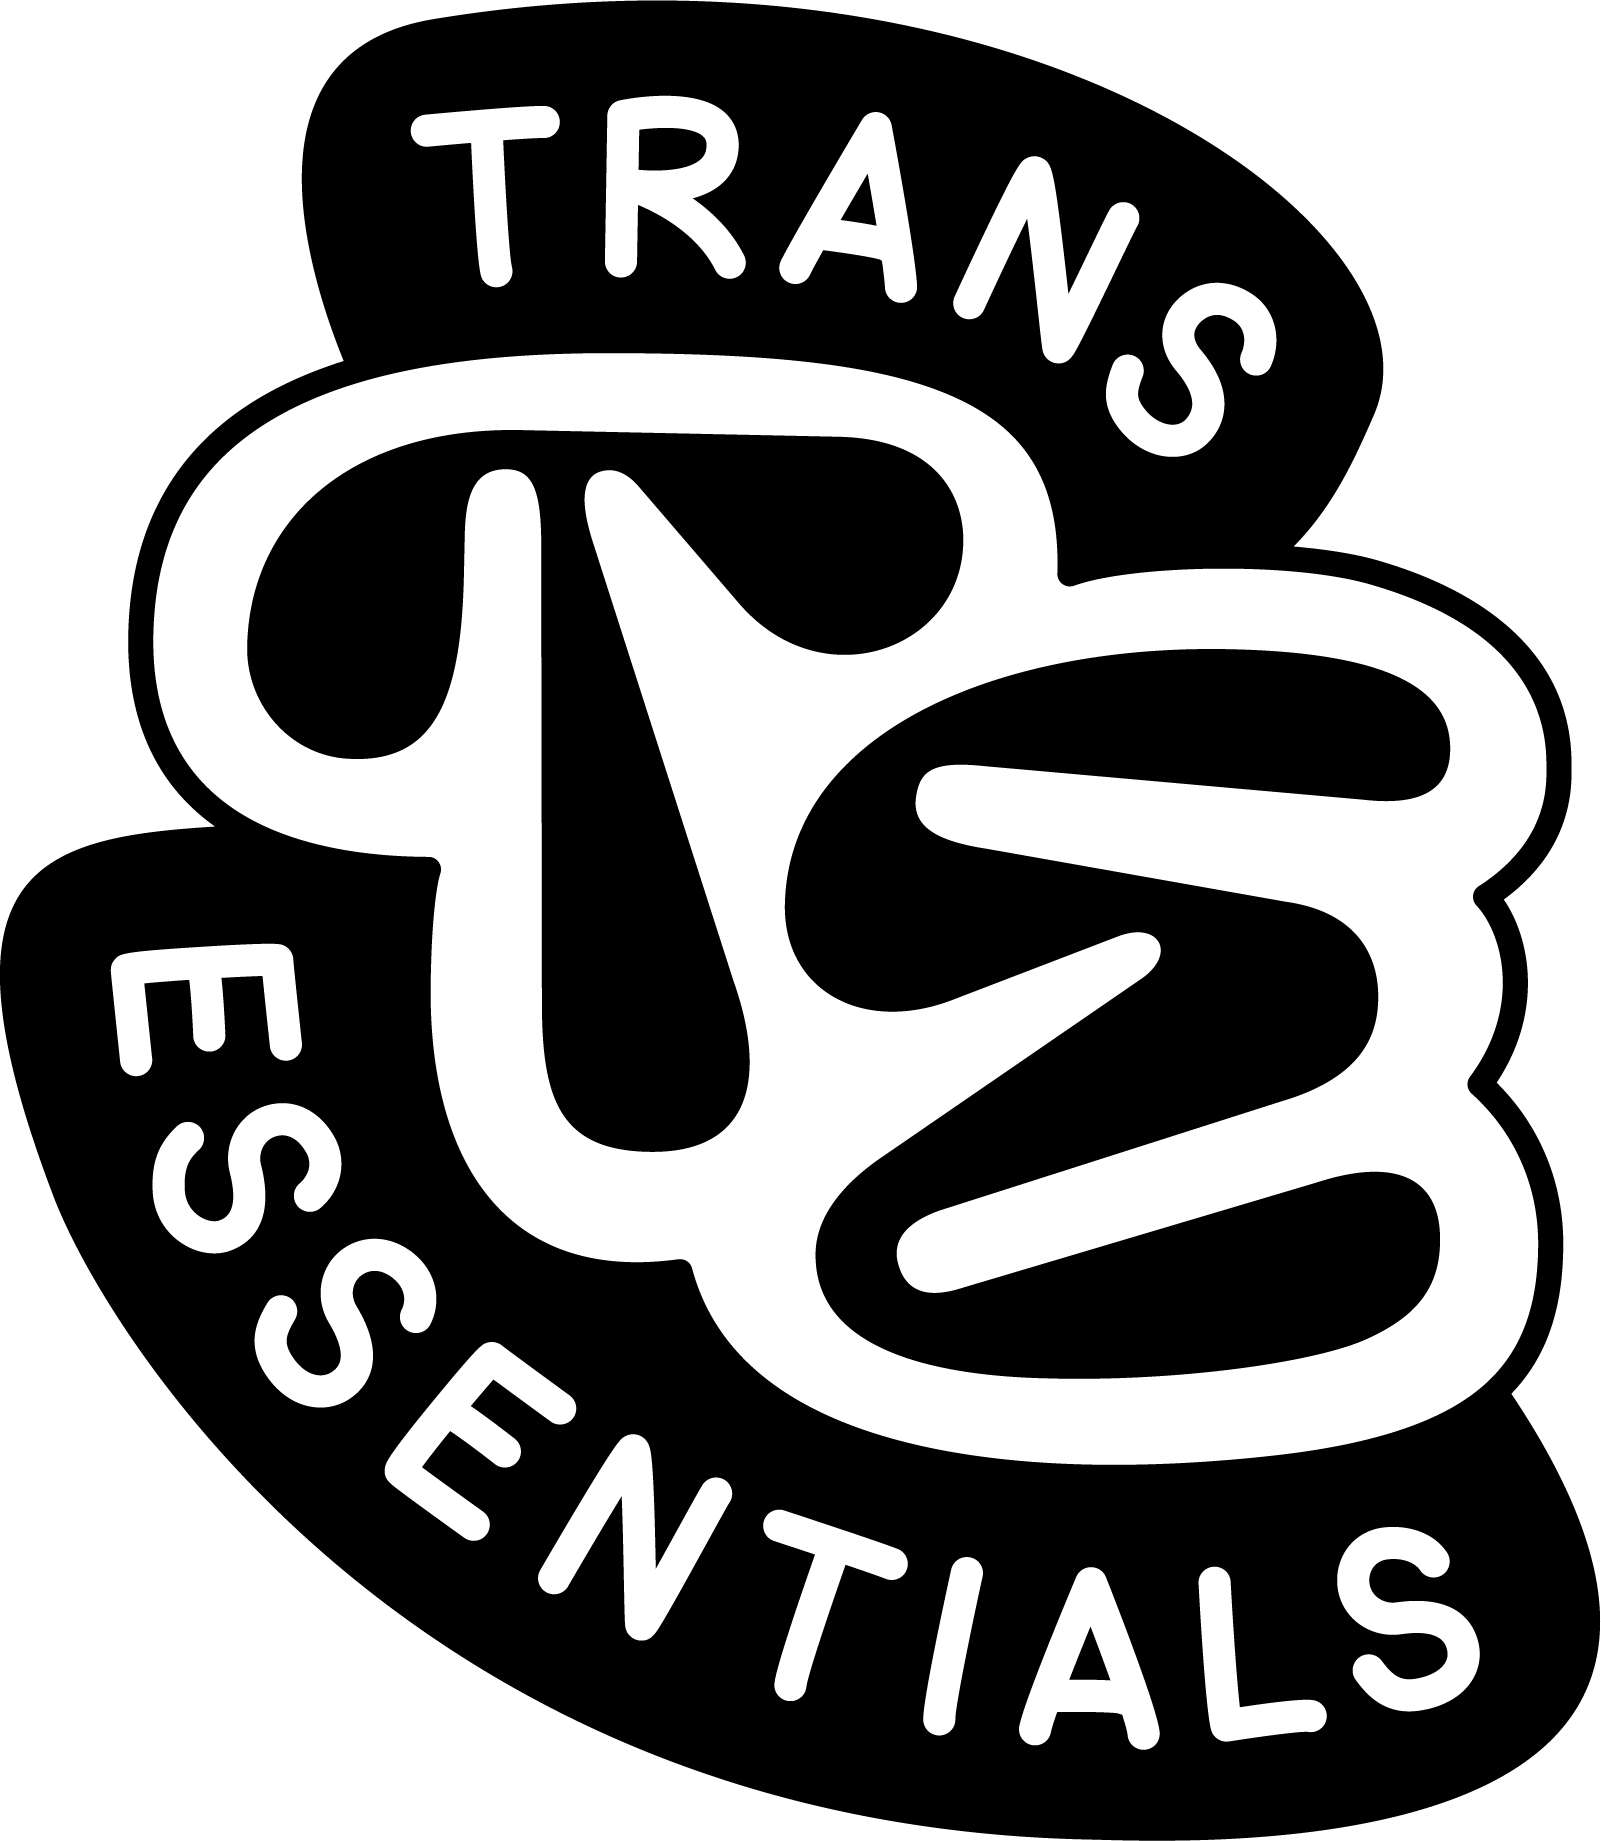 Trans Essentials logo with one large T and one large E with the full name of the business around it